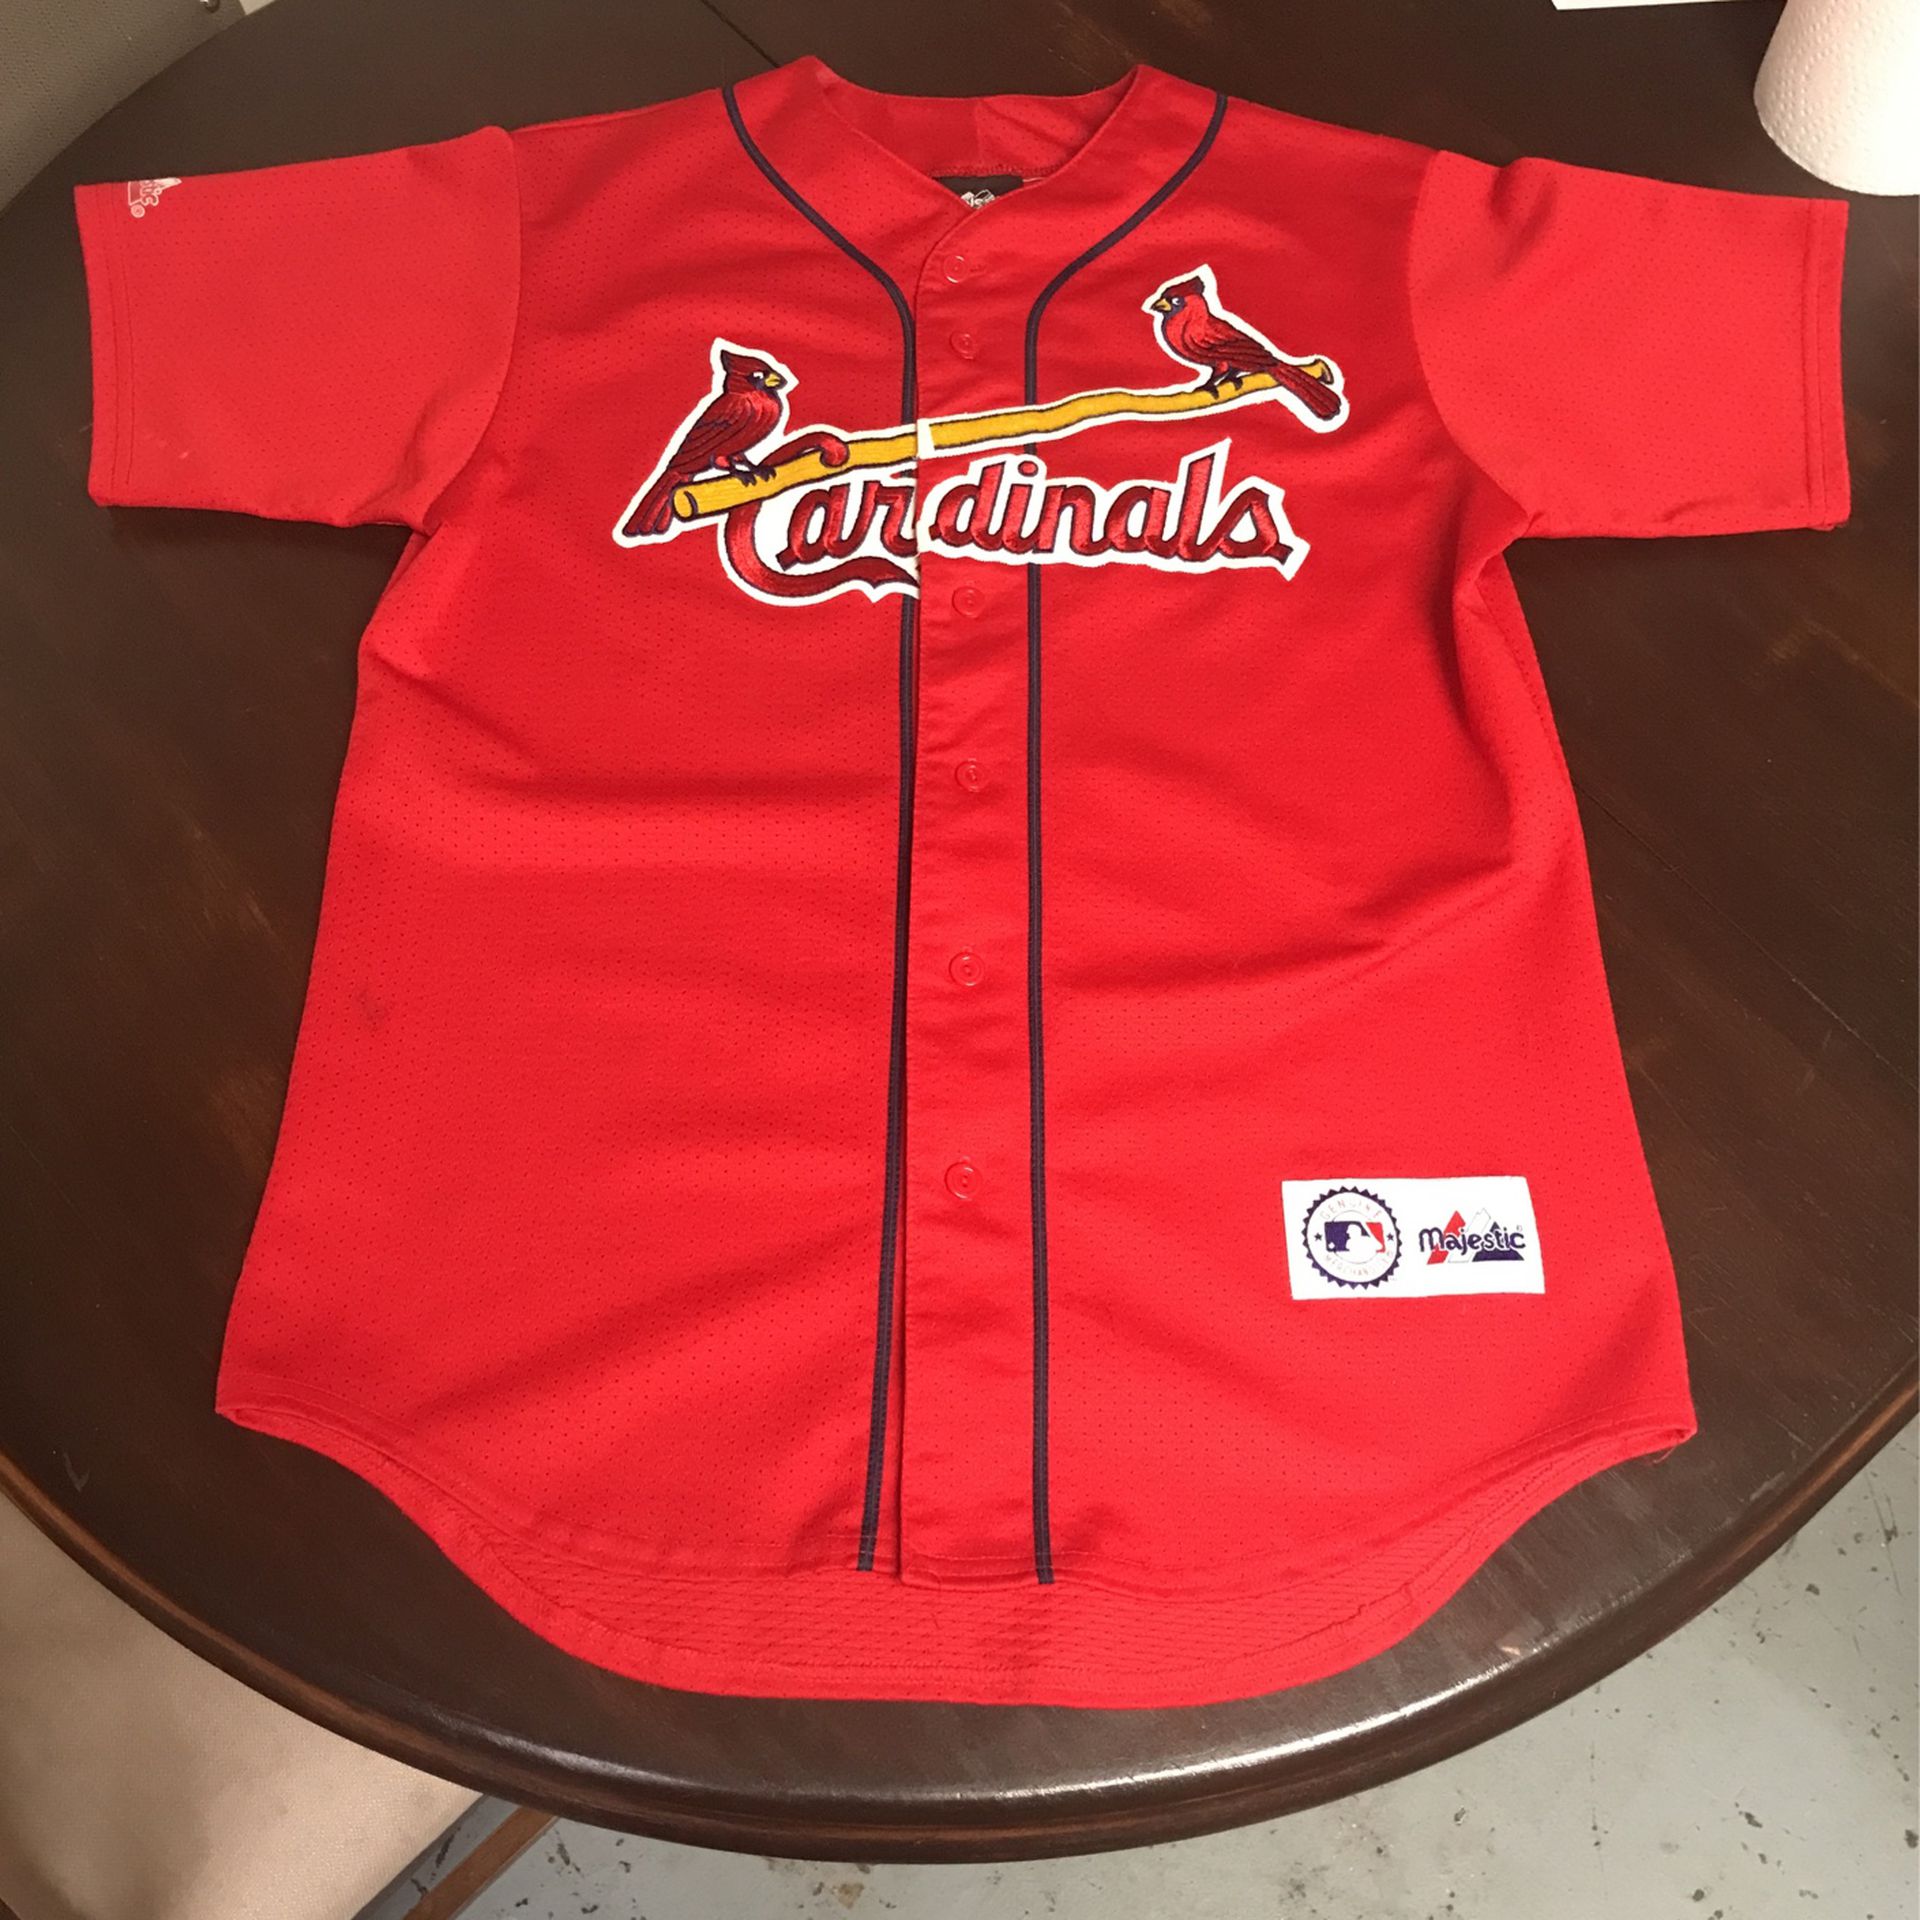 St. Louis Cardinals J.D. Drew Adult Medium Jersey for Sale in Saint  Charles, MO - OfferUp